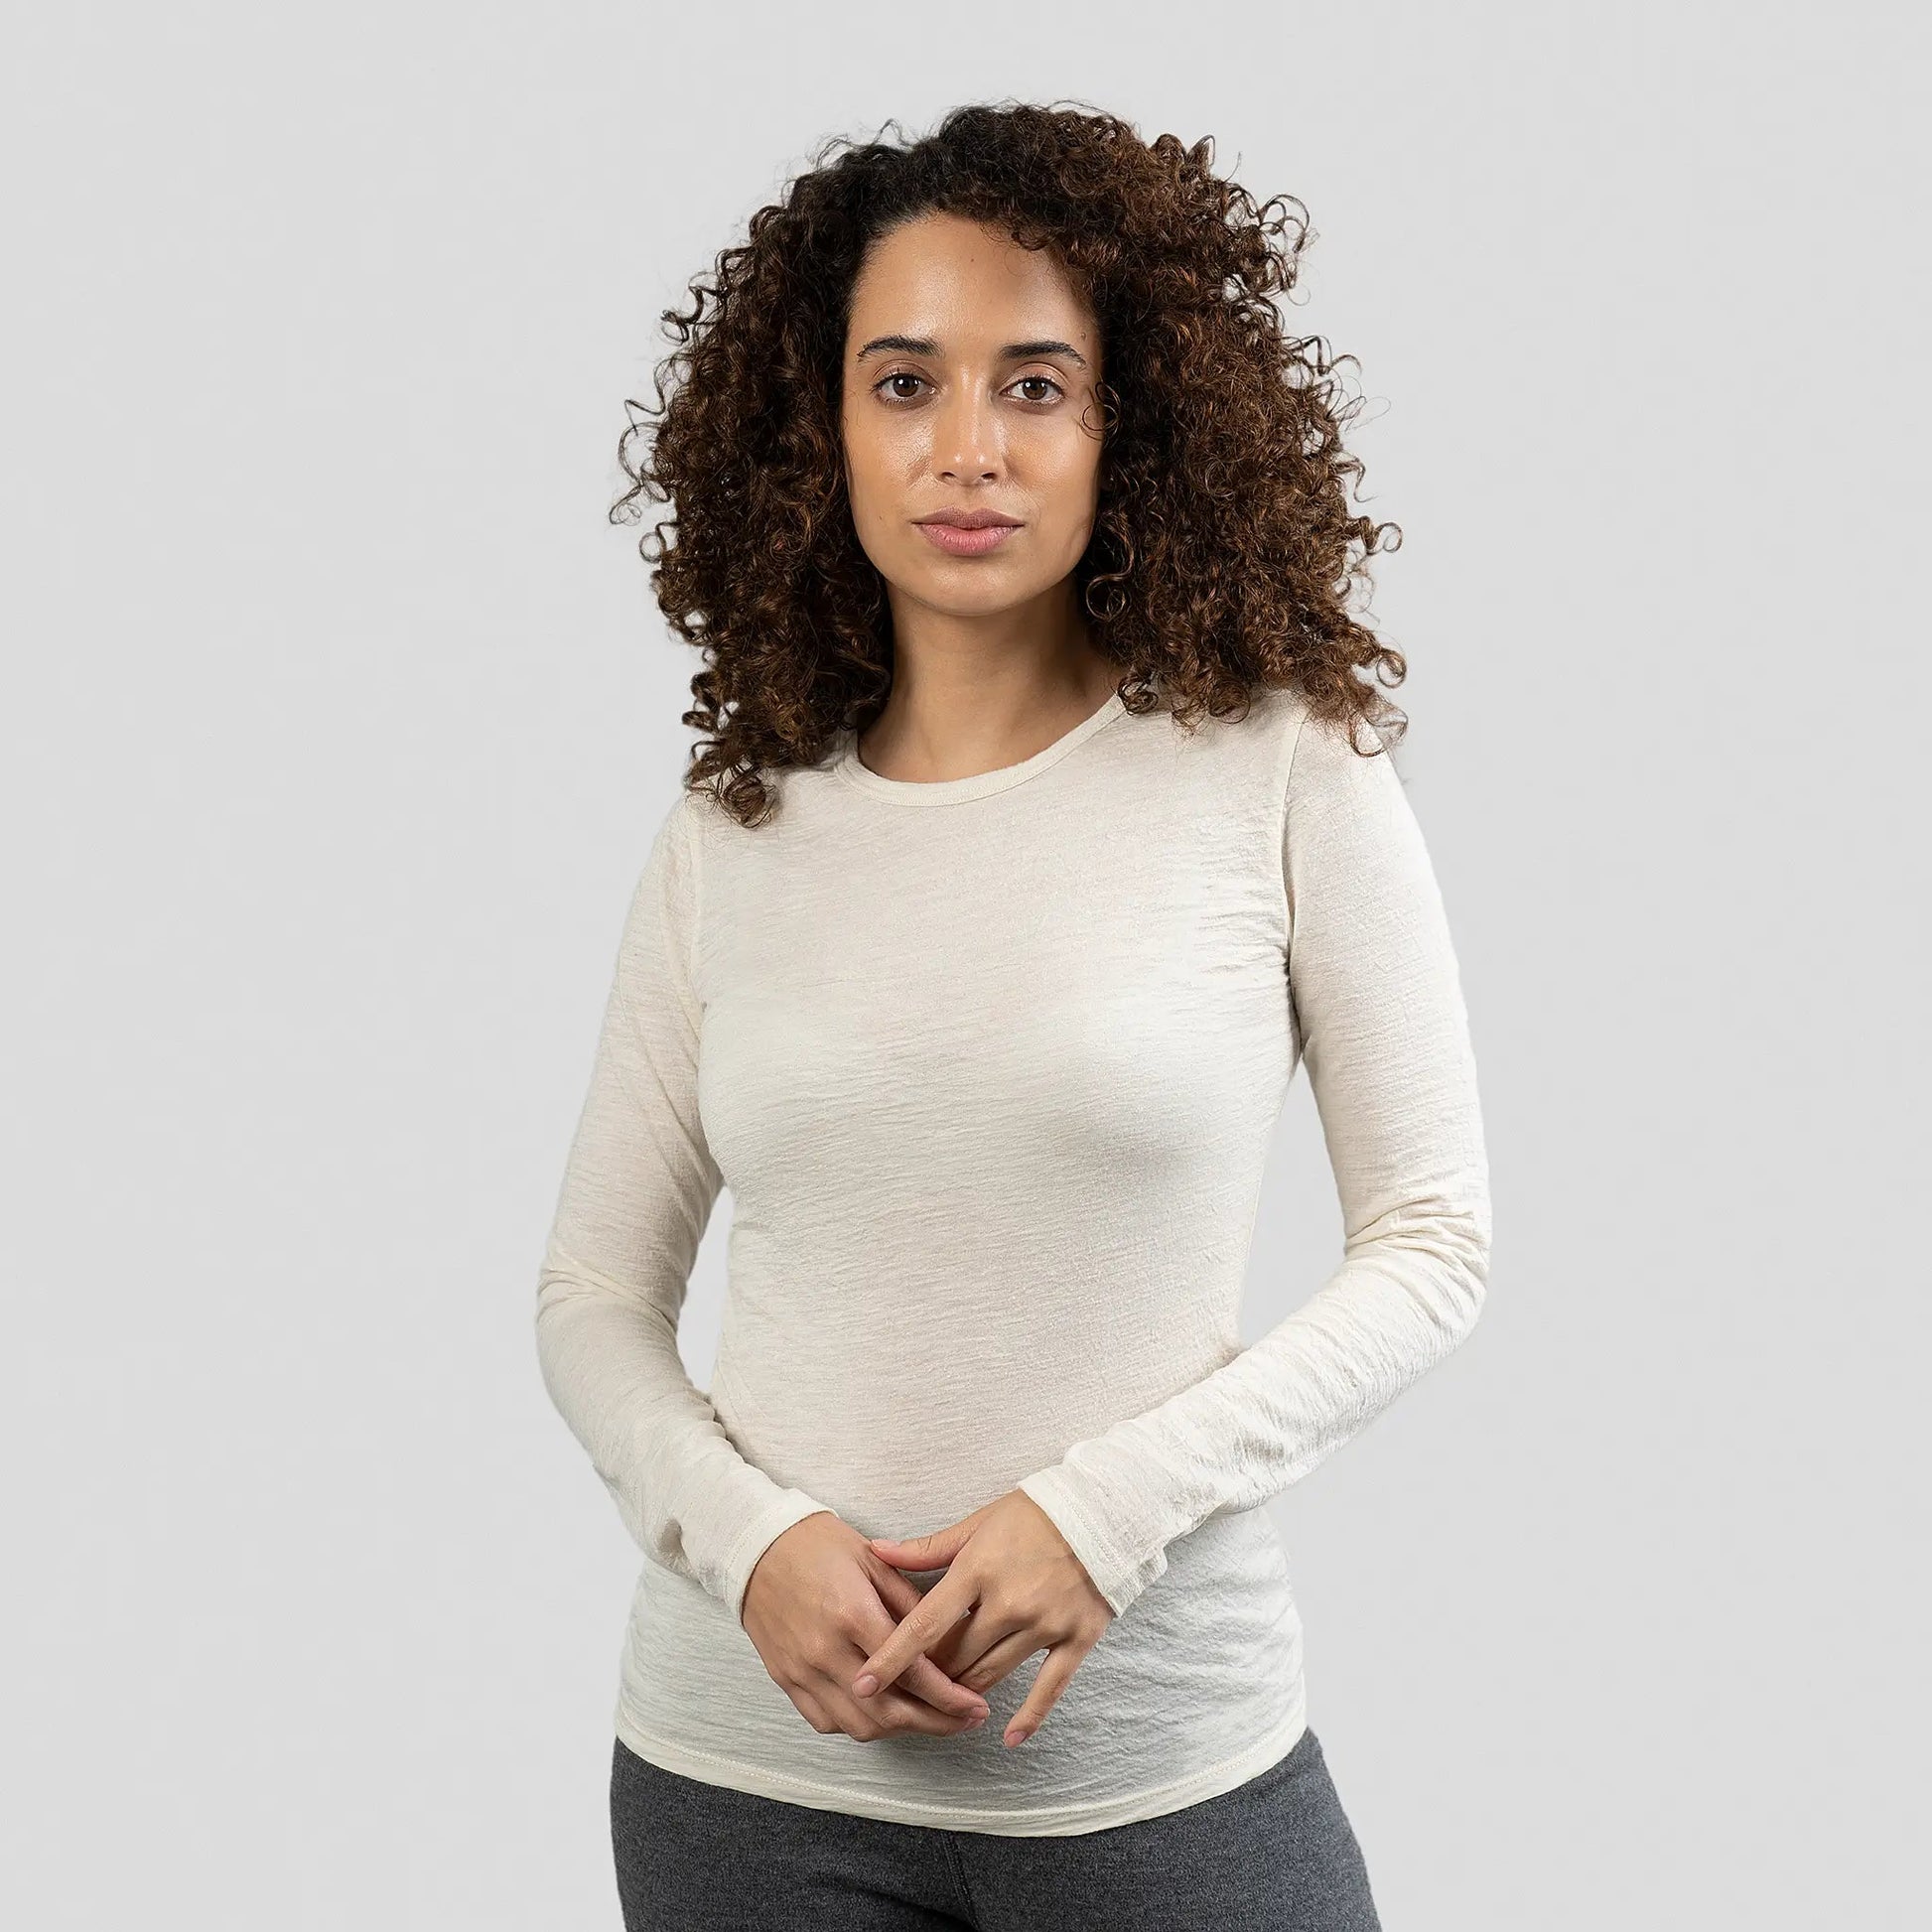 Women's Alpaca Wool Long Sleeve Base Layer: 110 Ultralight color Natural White